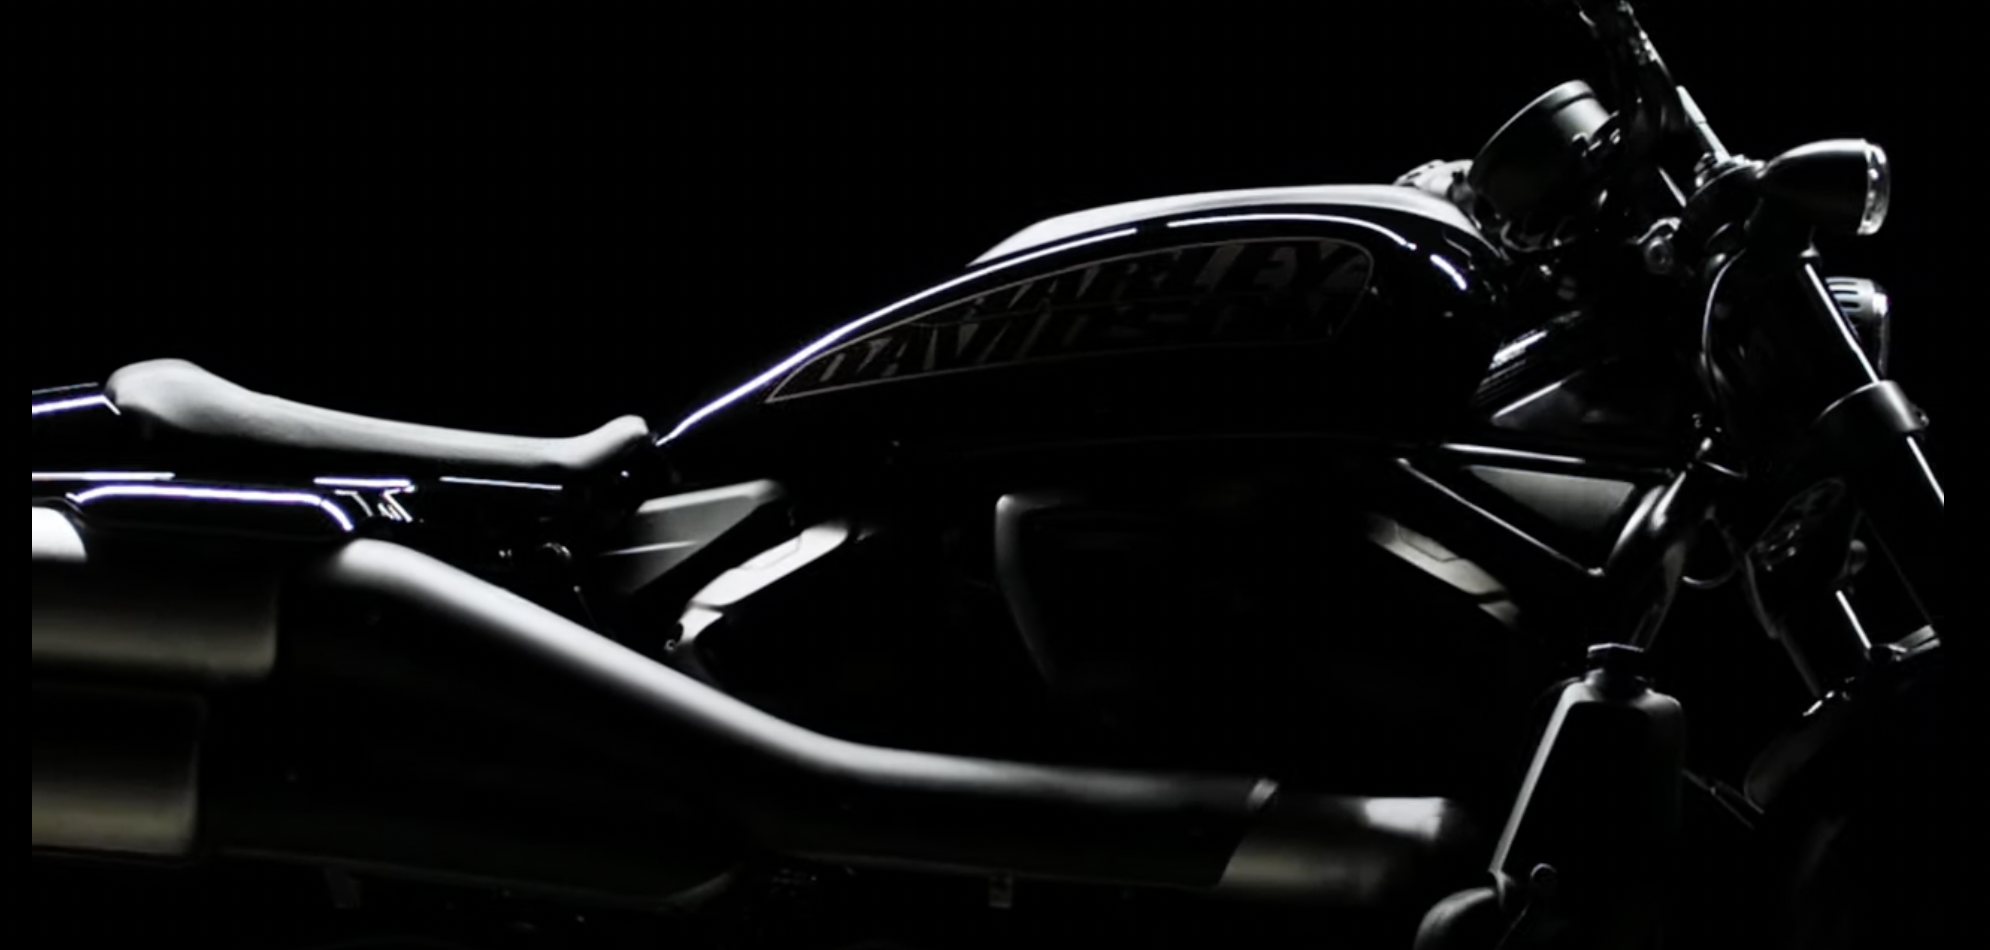 First Glimpse Of Incoming Production Harley Davidson 12 Visordown